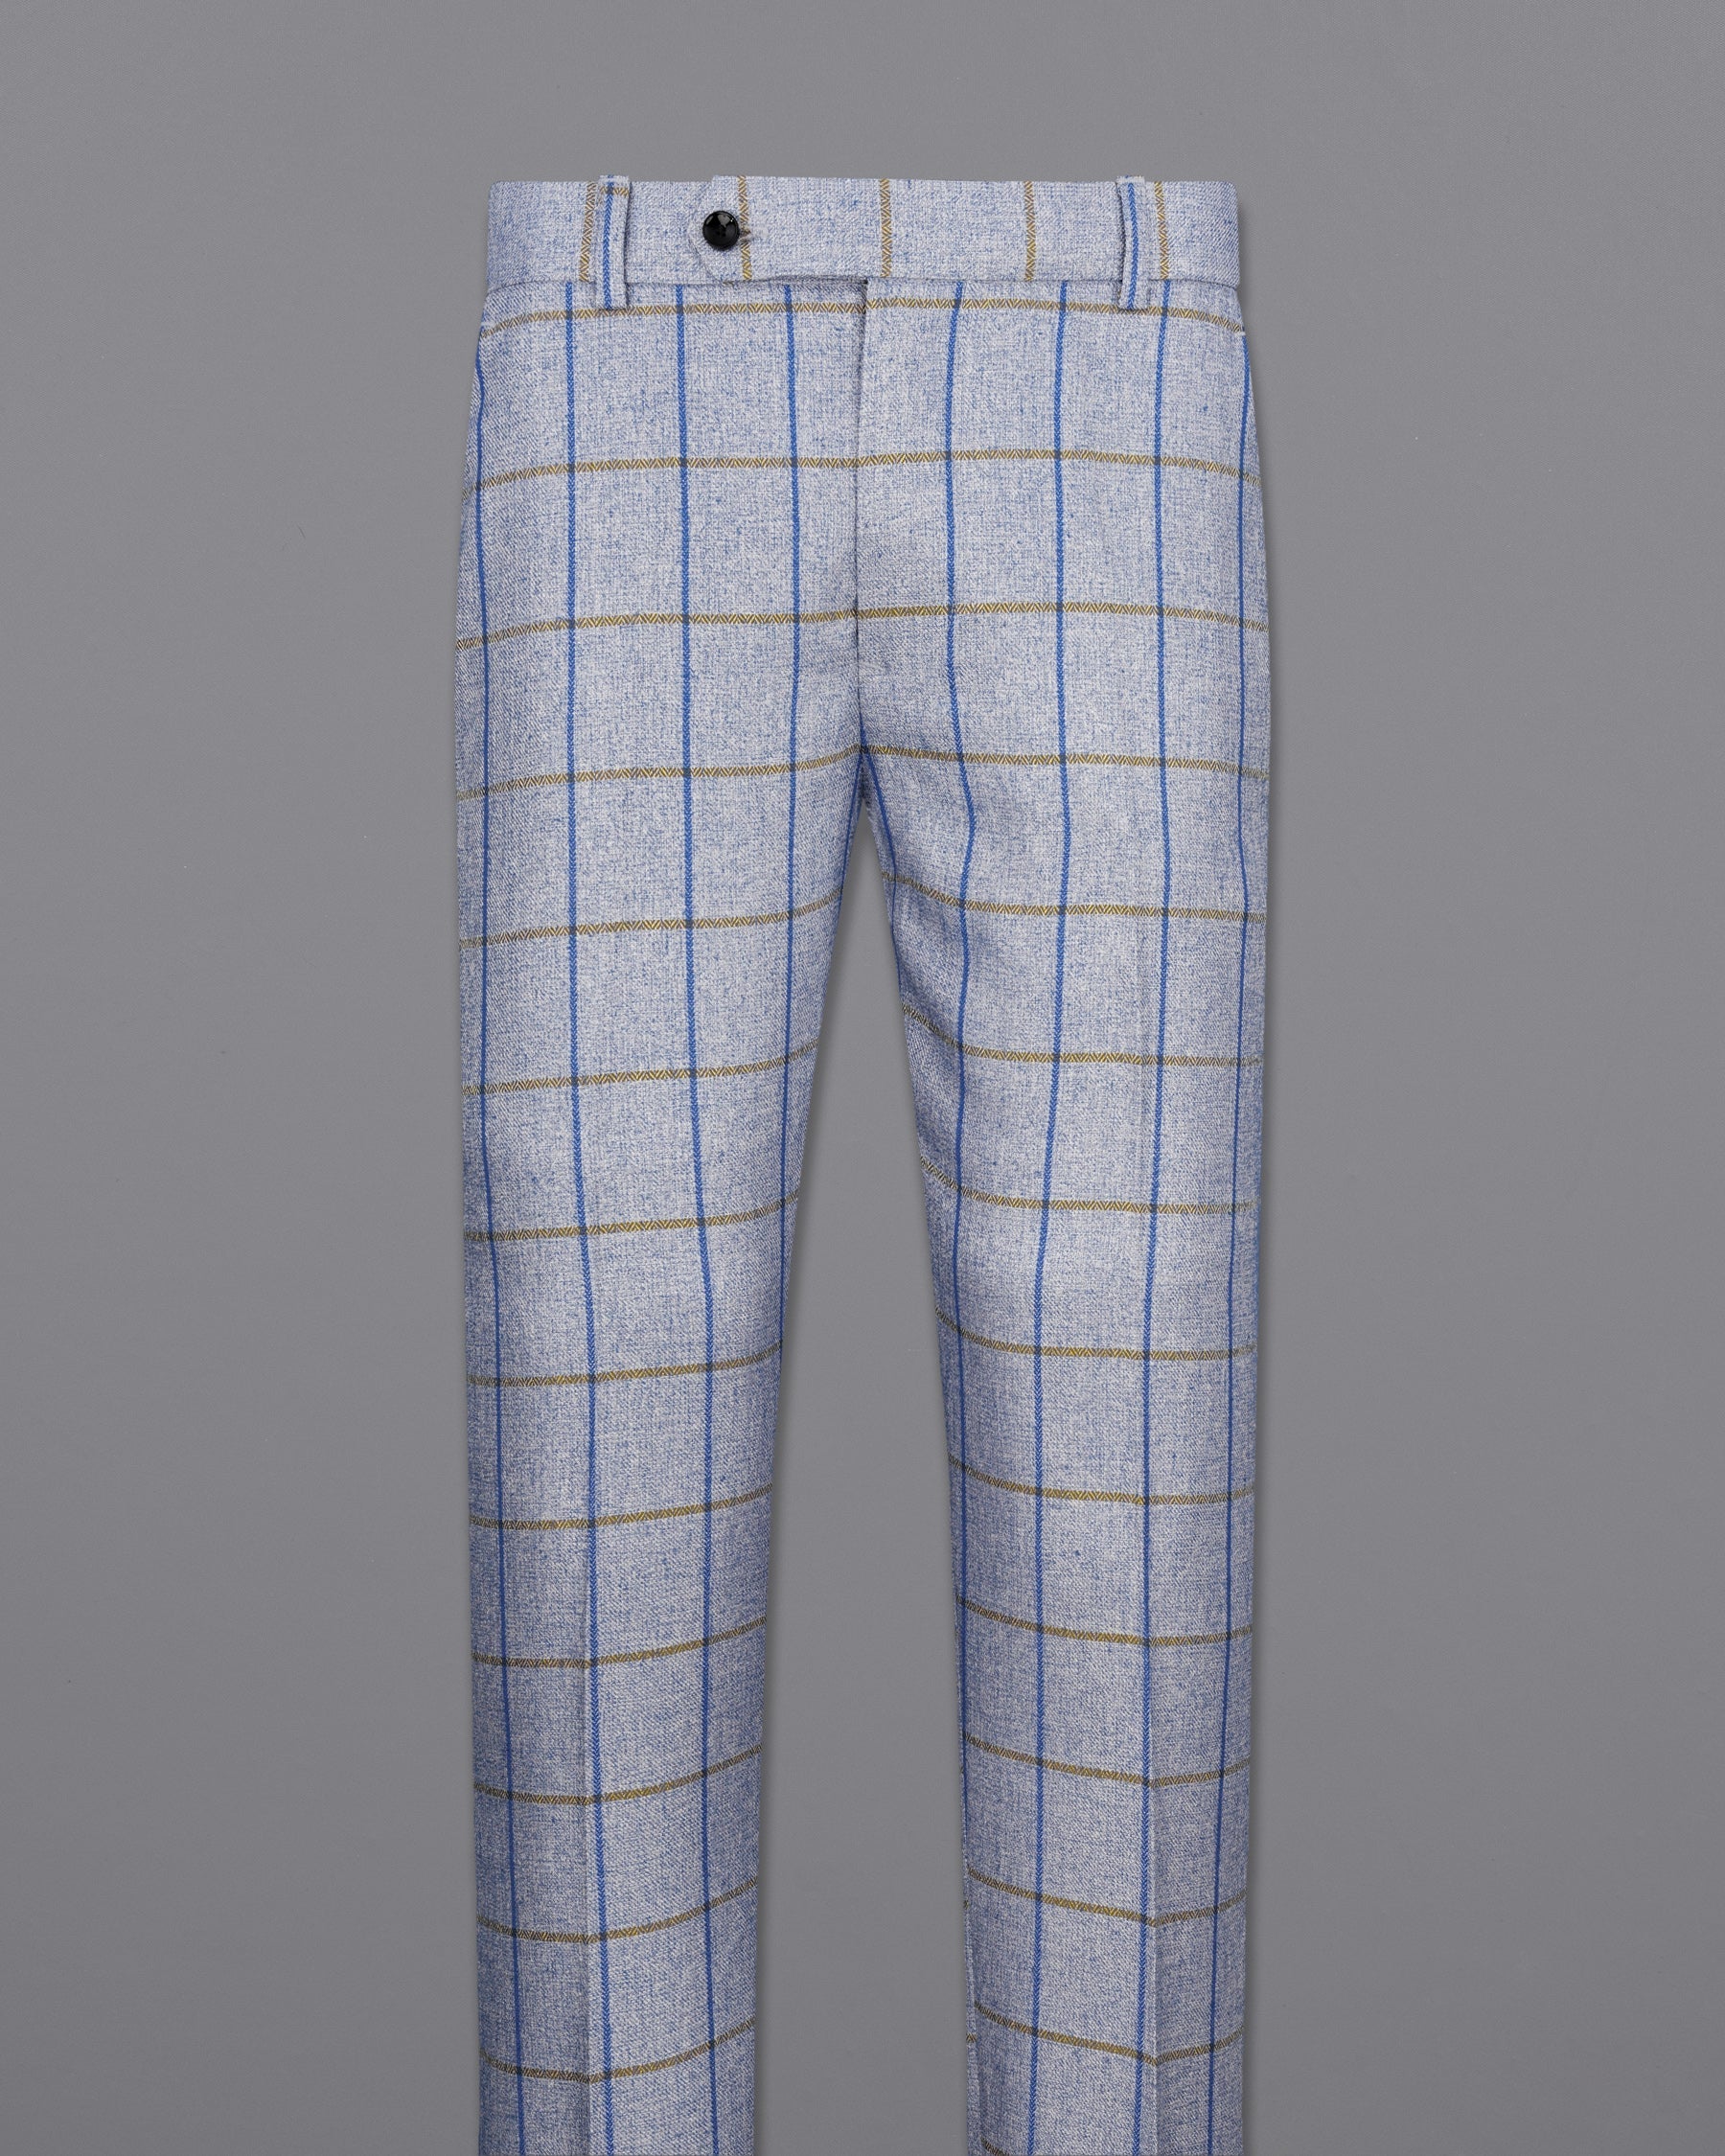 Mobster Blue Checkered Pant T2150-28, T2150-30, T2150-32, T2150-34, T2150-36, T2150-38, T2150-40, T2150-42, T2150-44